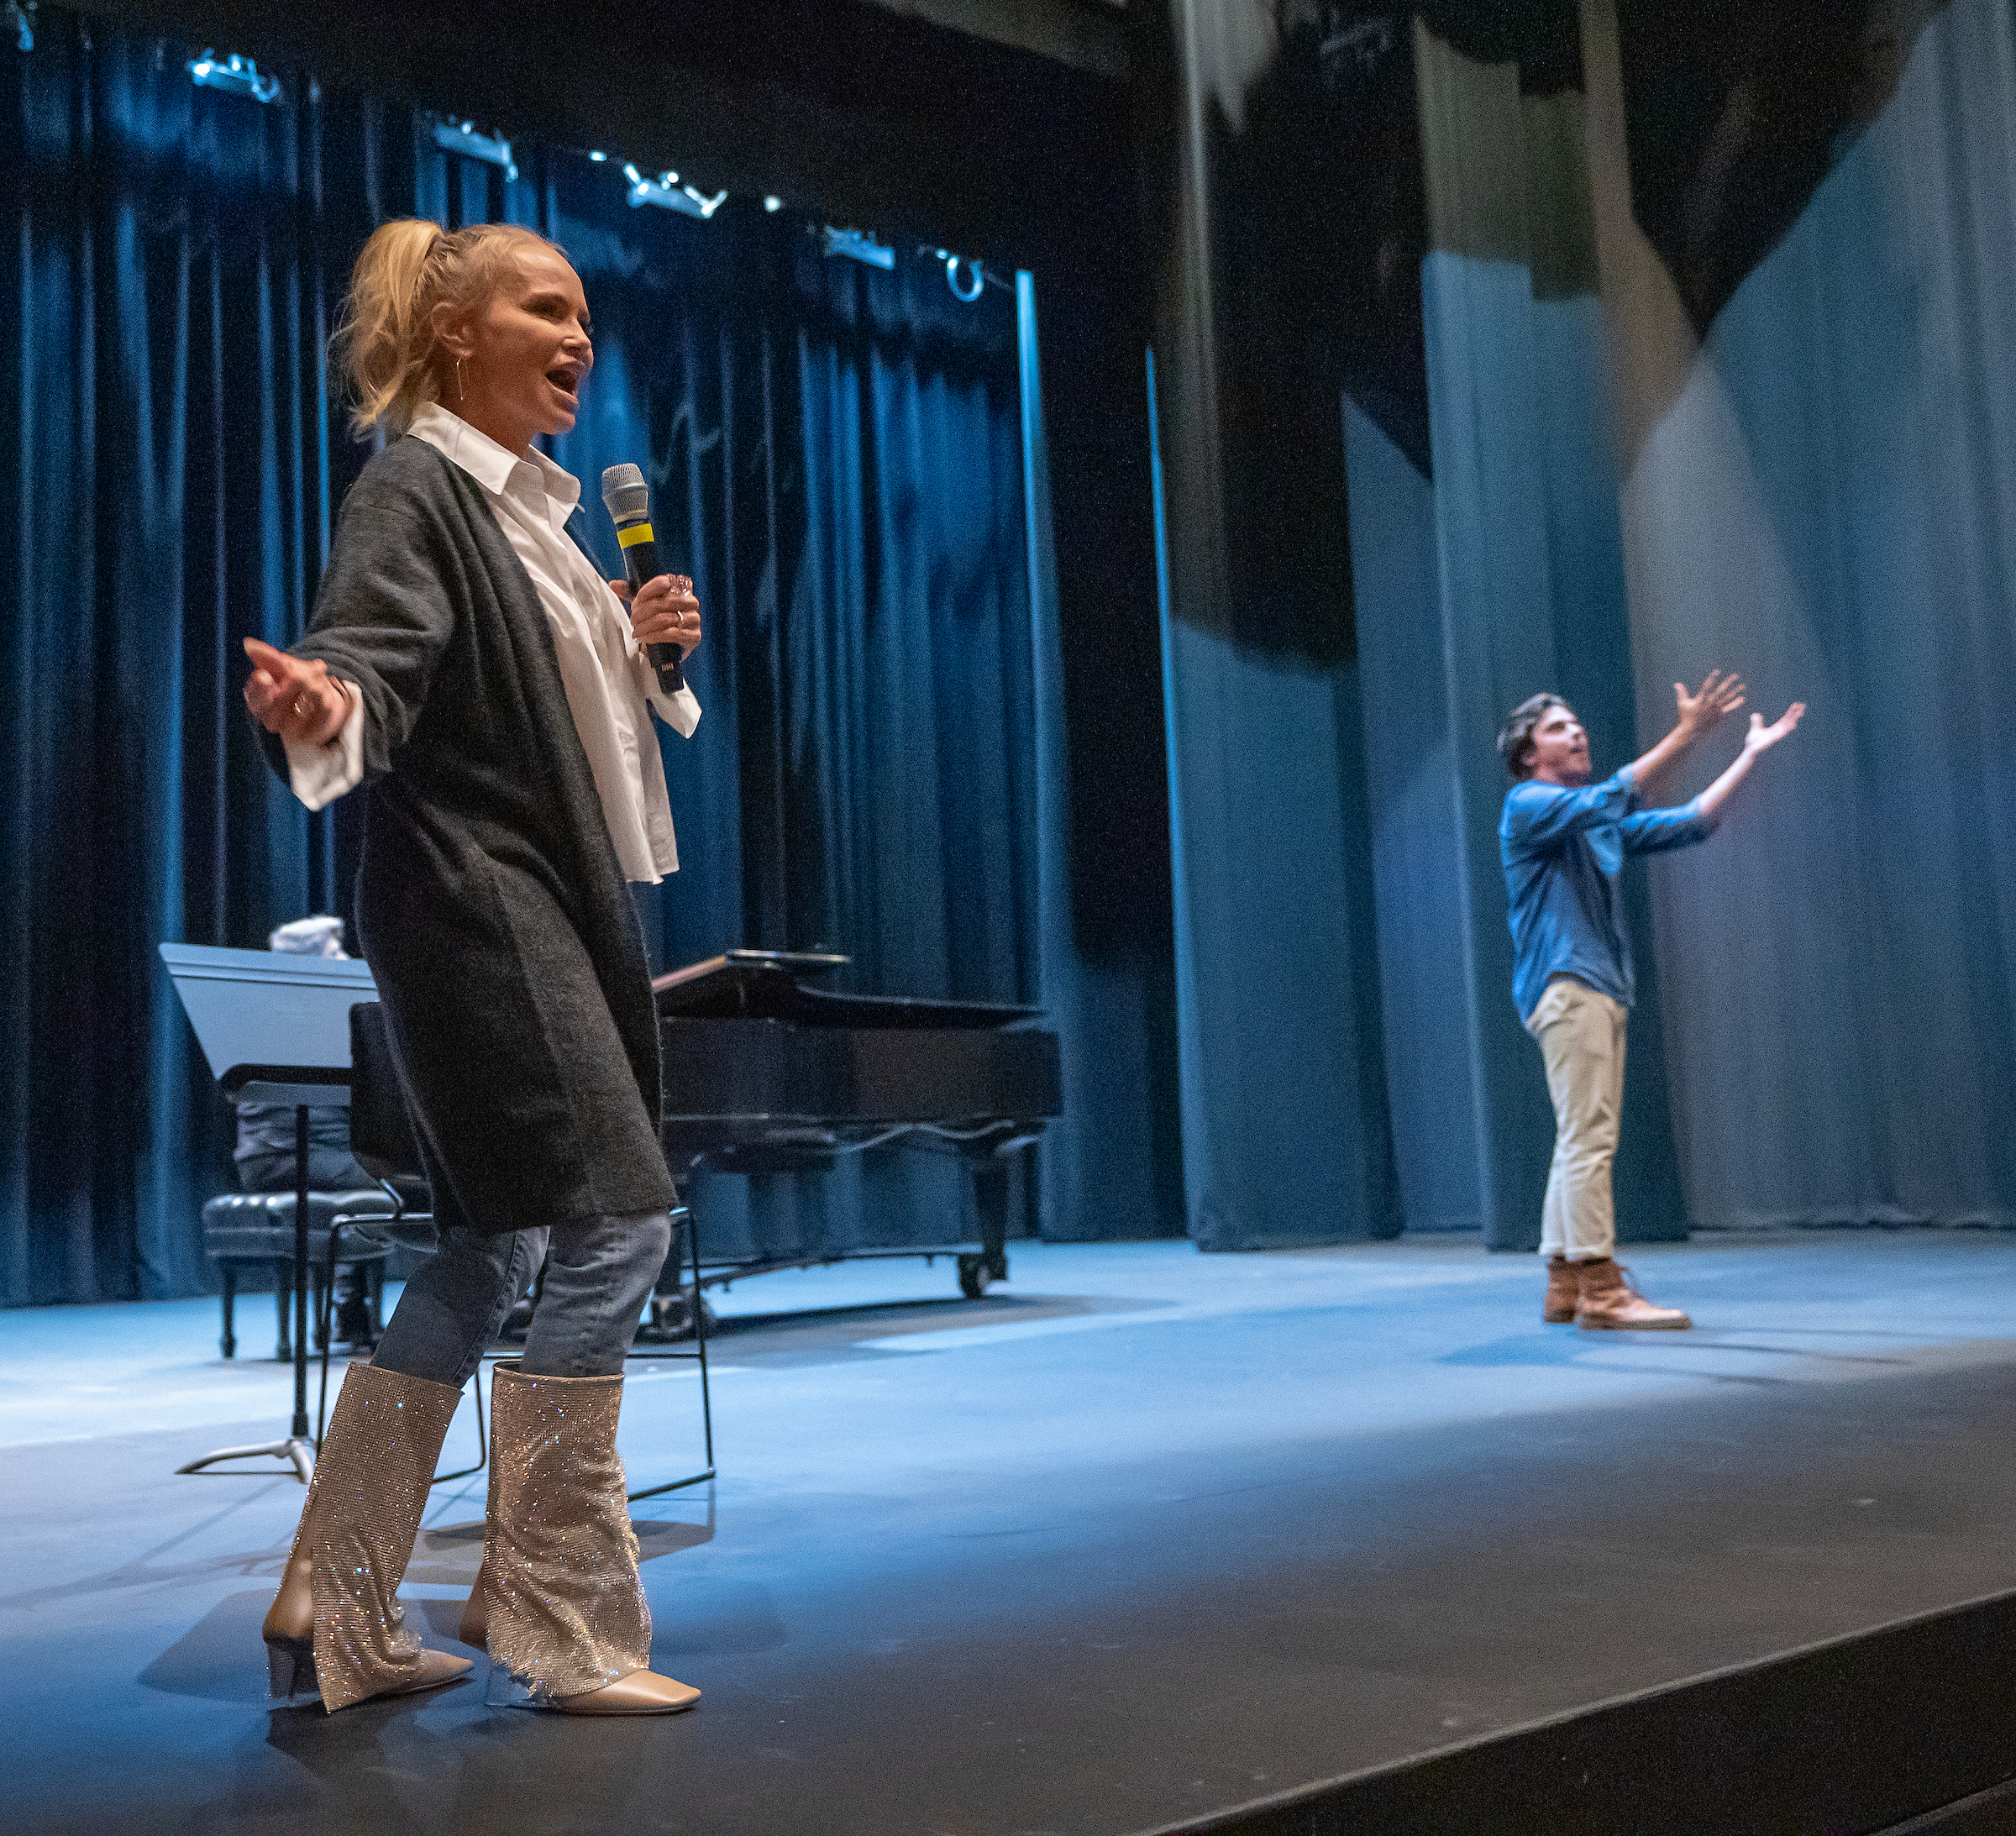 Actress Kristin Chenoweth onstage with student performing.